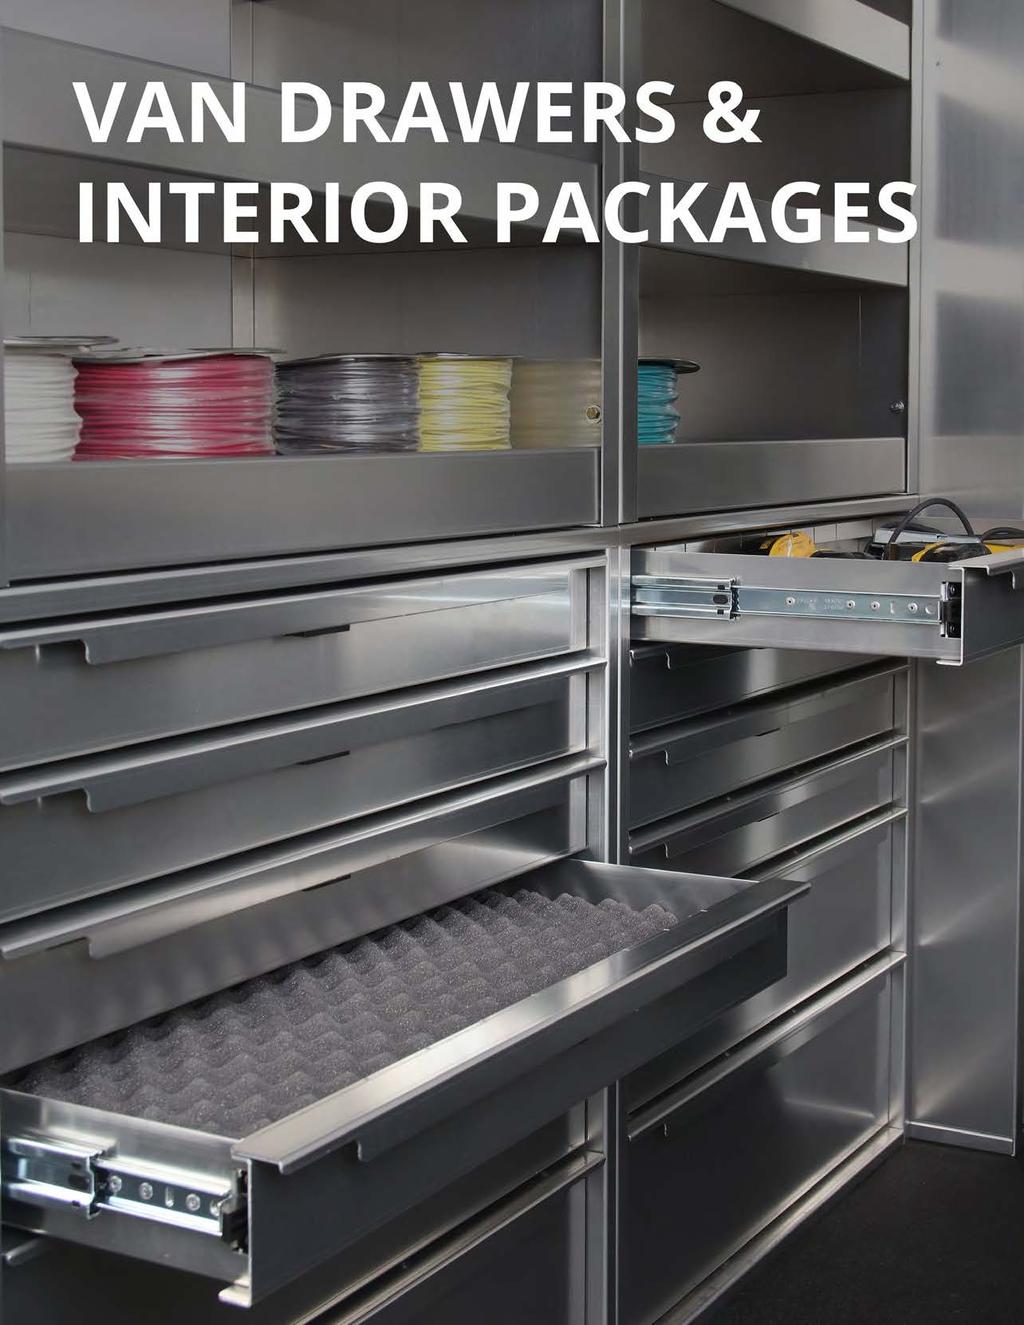 REAR VAN DRAWERS FOR ANY NEED We will design a storage solution that works for you. When we design van interiors, we do so with your specific needs in mind.